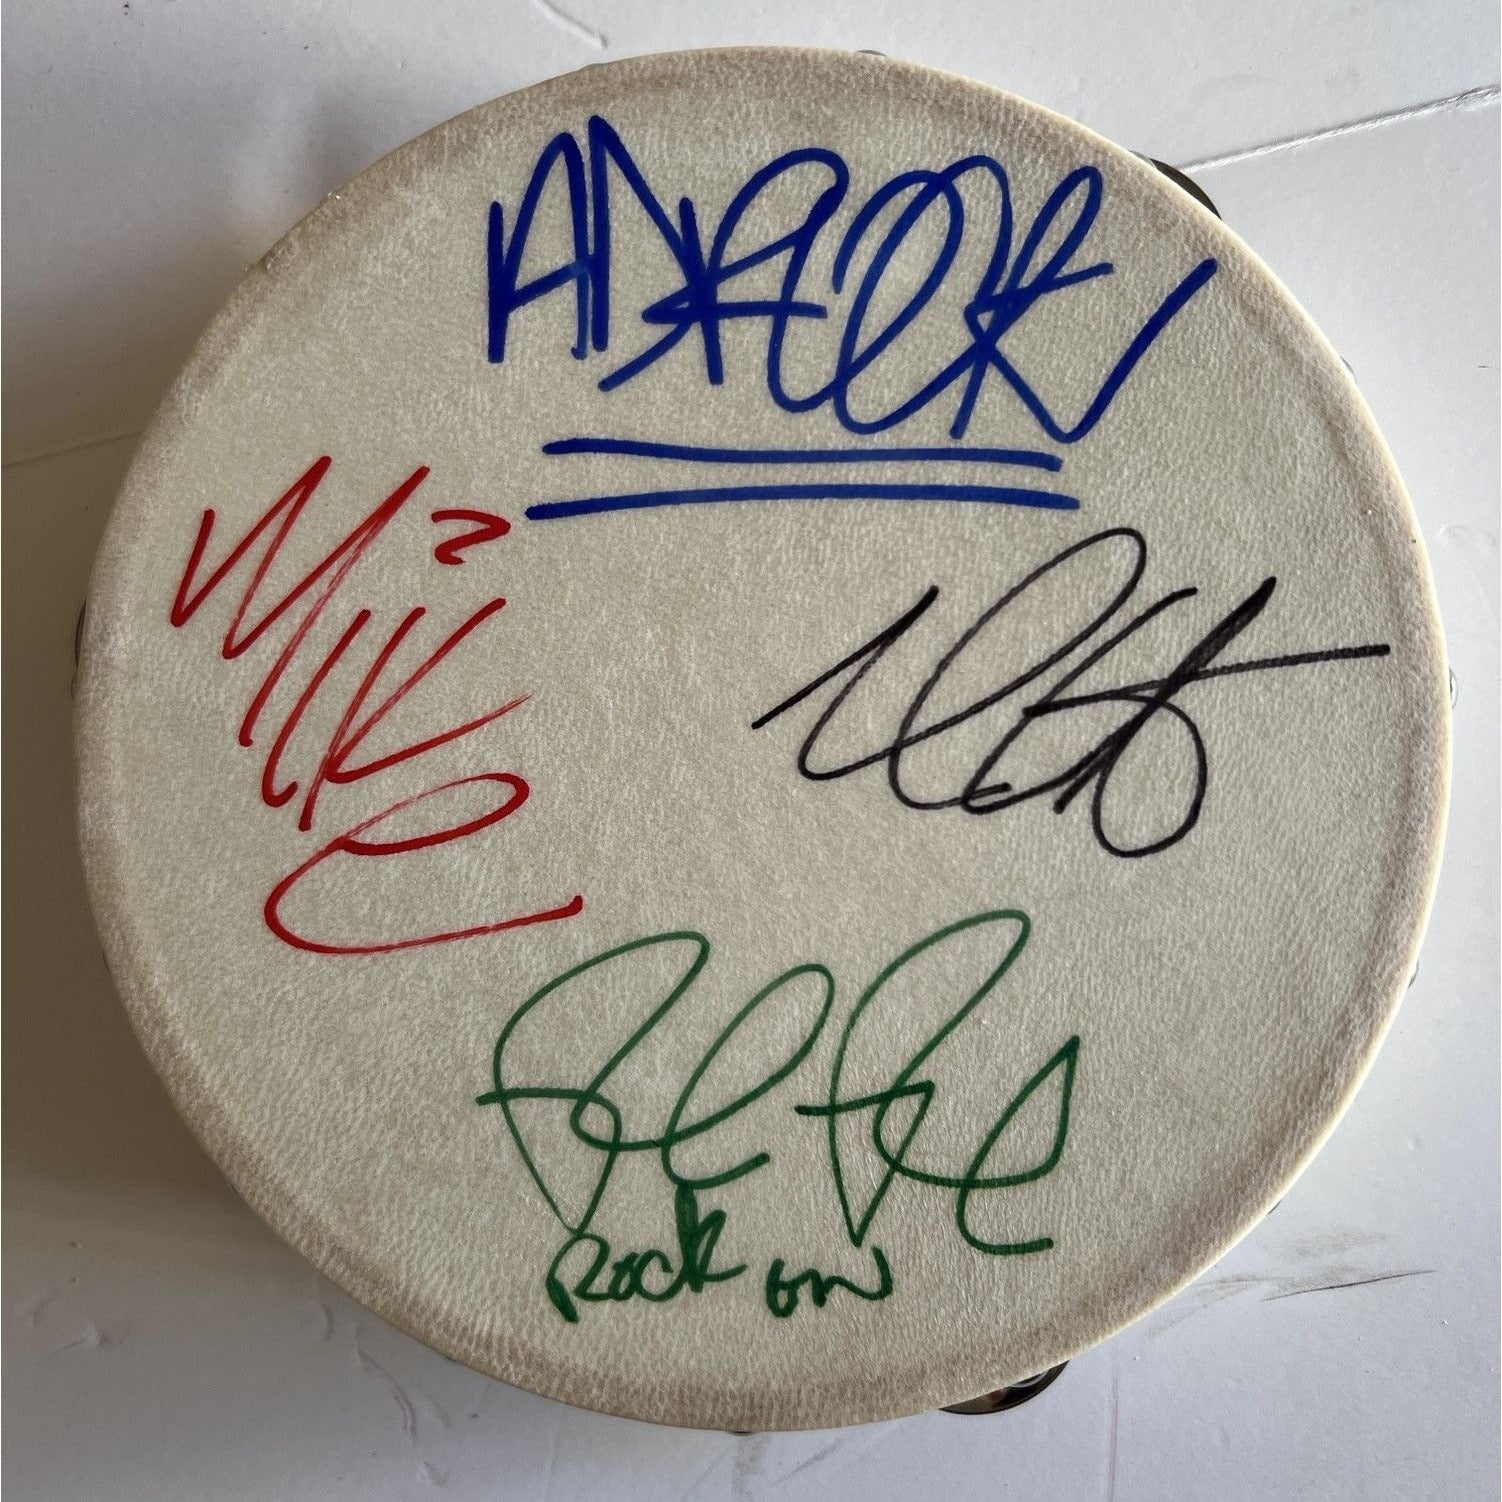 Duran Duran Simon Le Bon, John Taylor, Nick Rhodes Roger Taylor and Andy Taylor tambourine signed with proof